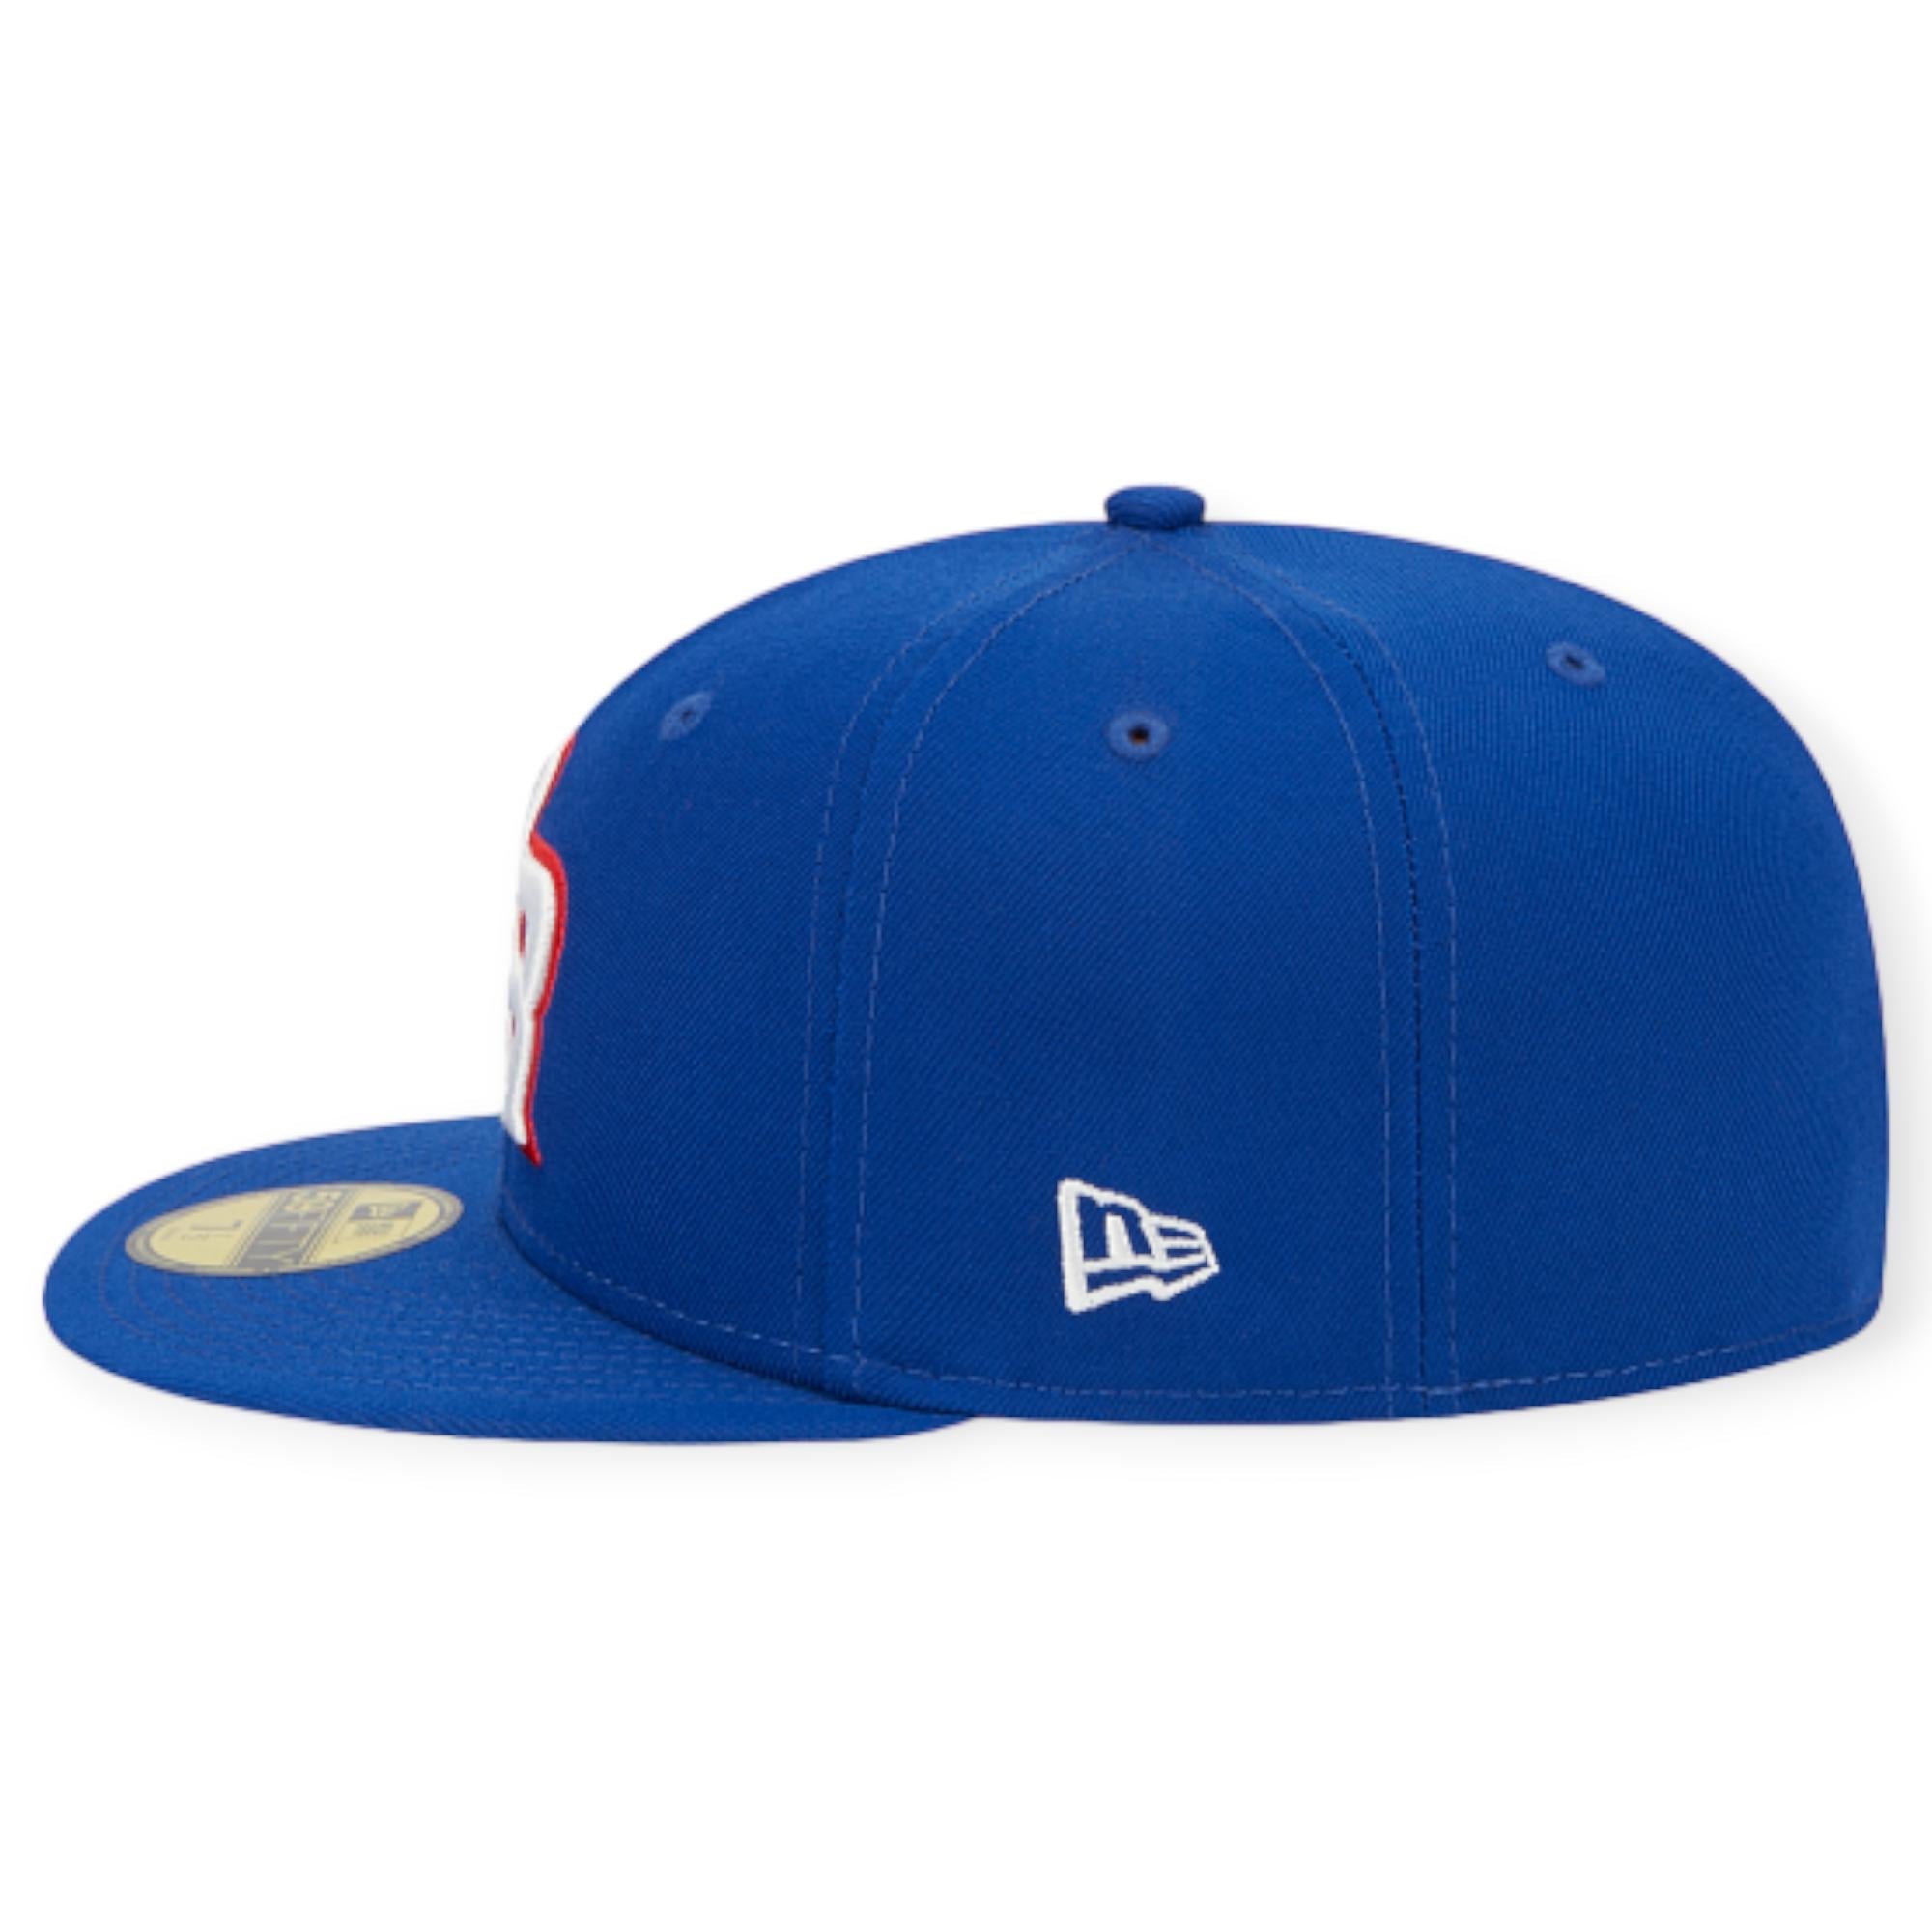 New Era Puerto Rico World Baseball Classic 59FIFTY Fitted Hat (Blue) 4